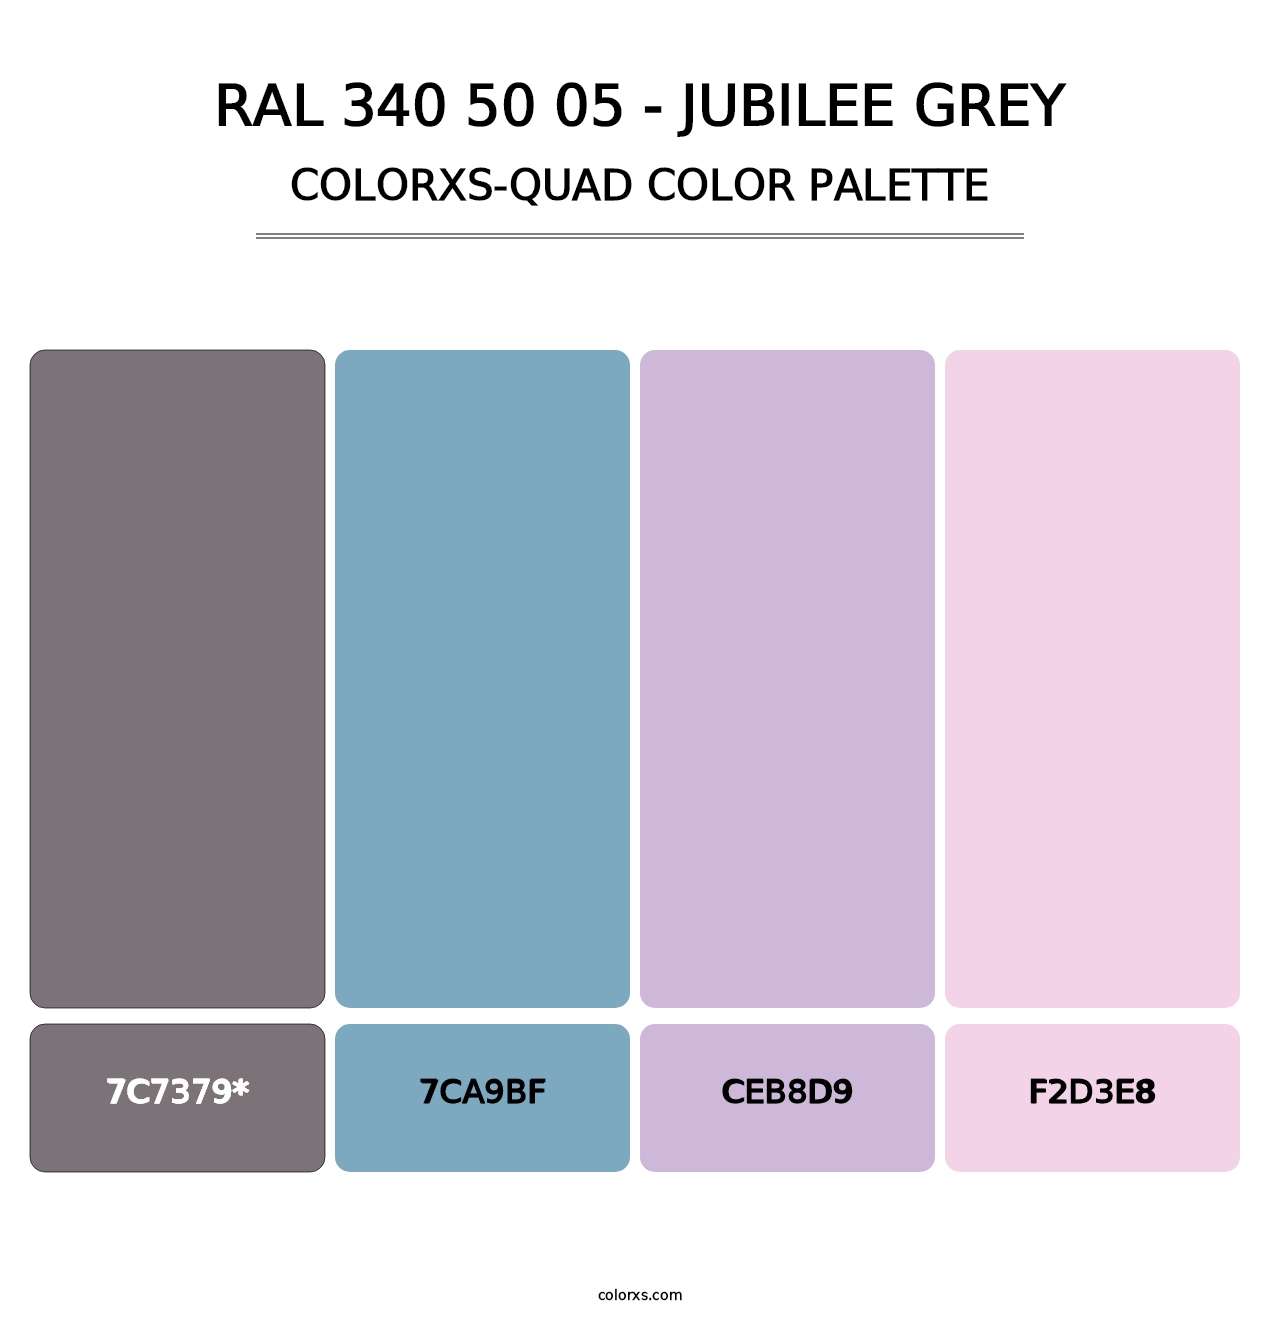 RAL 340 50 05 - Jubilee Grey - Colorxs Quad Palette